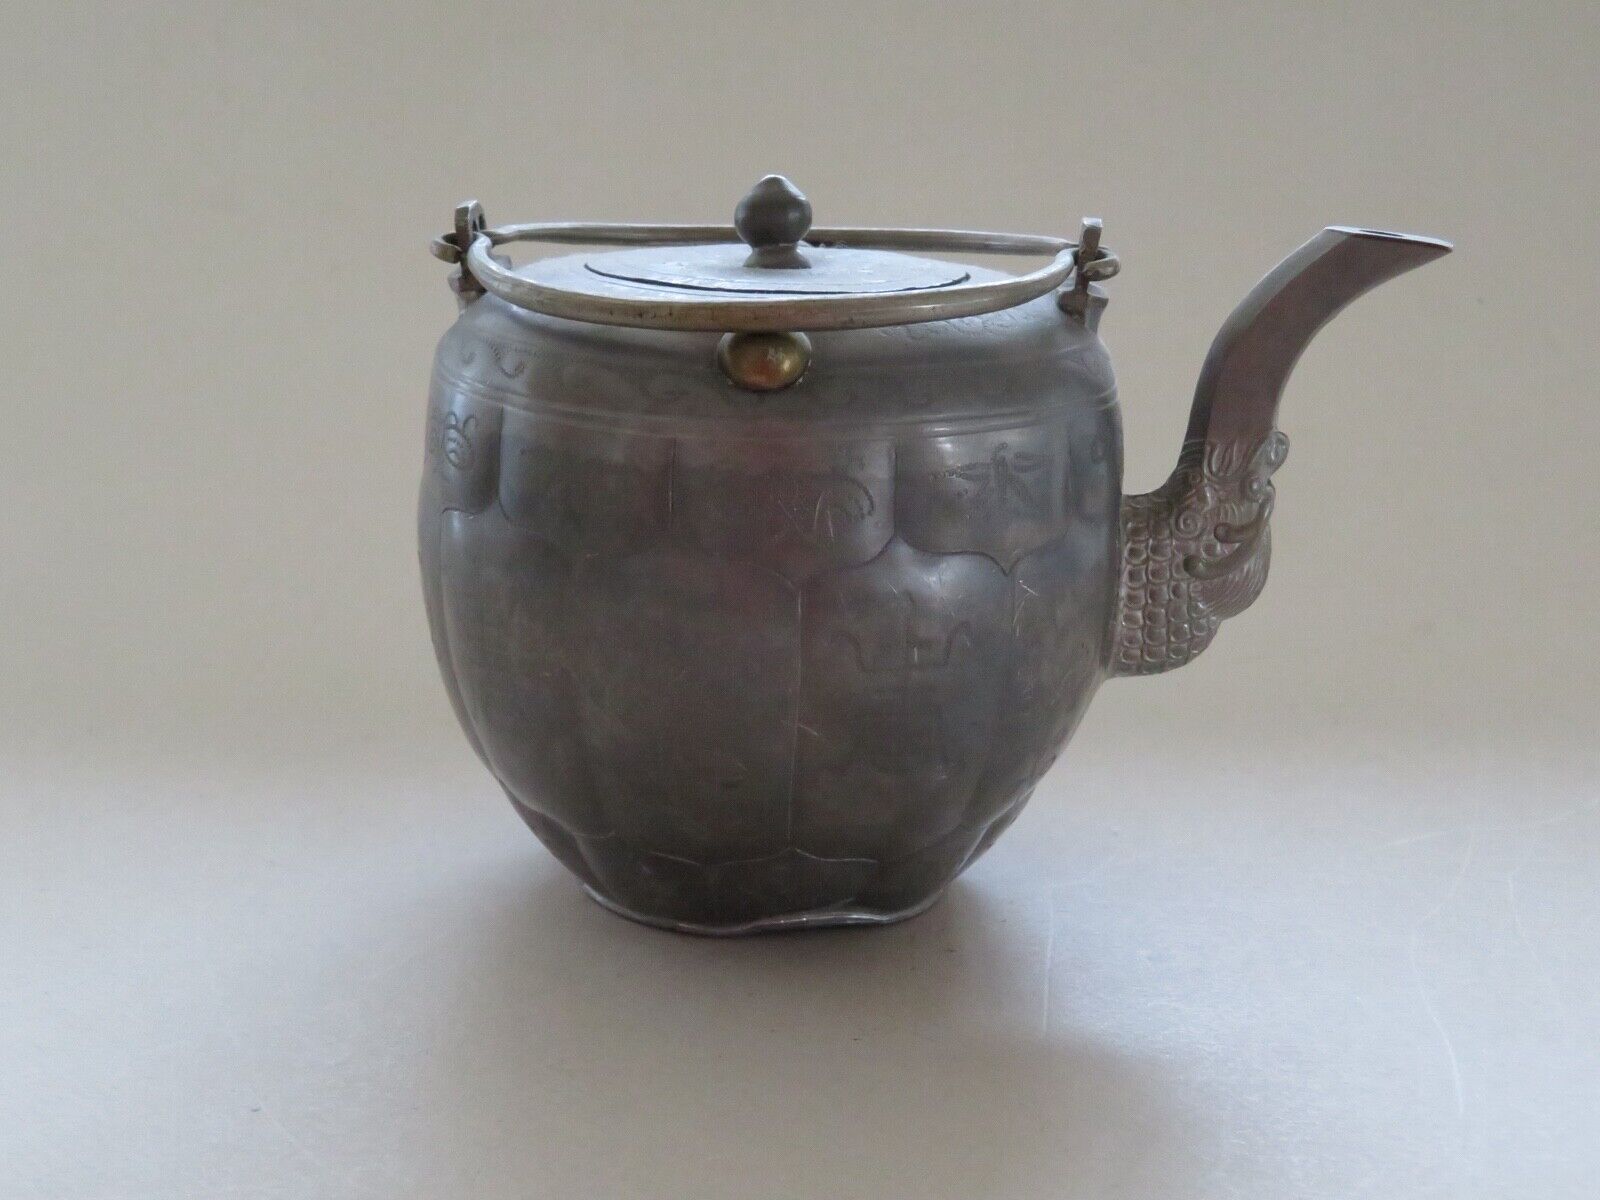 ANTIQUE CHINESE PEWTER & BRASS TEAPOT - DRAGON SPOUT - MARKED CHINA - CIRCA 1900